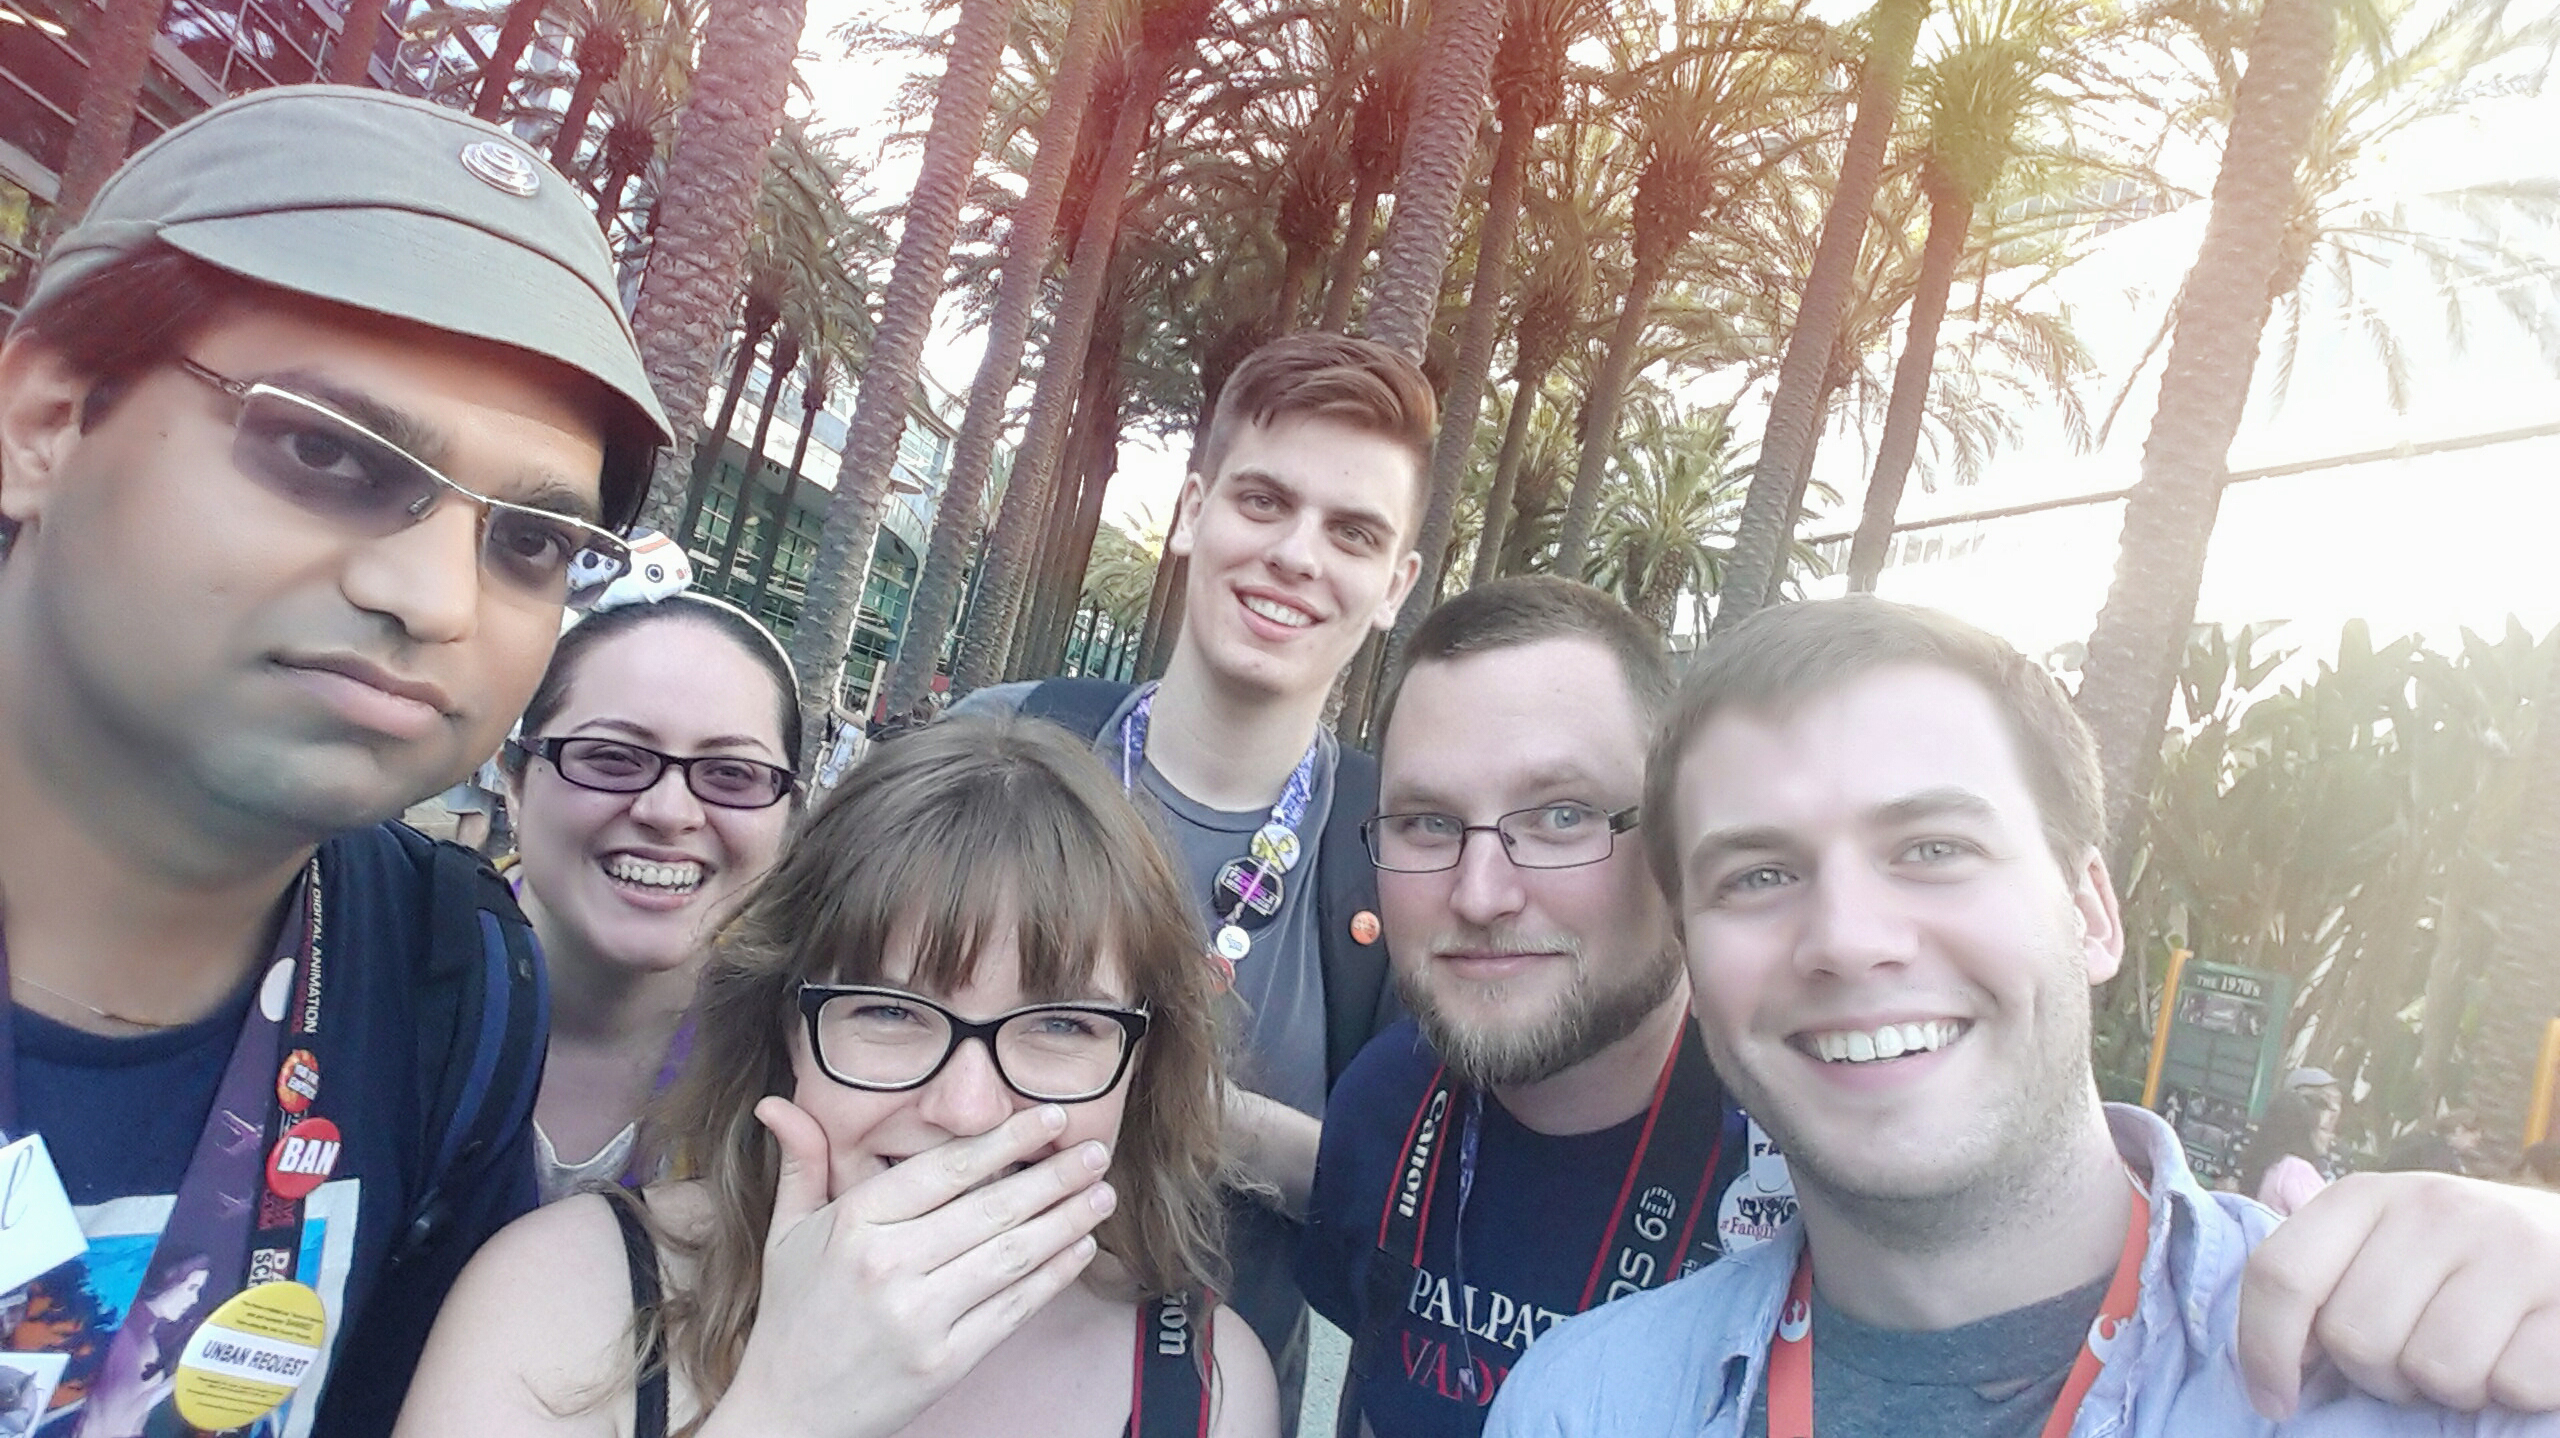 Our last group selfie, accidentally taken after Brian had already left us.